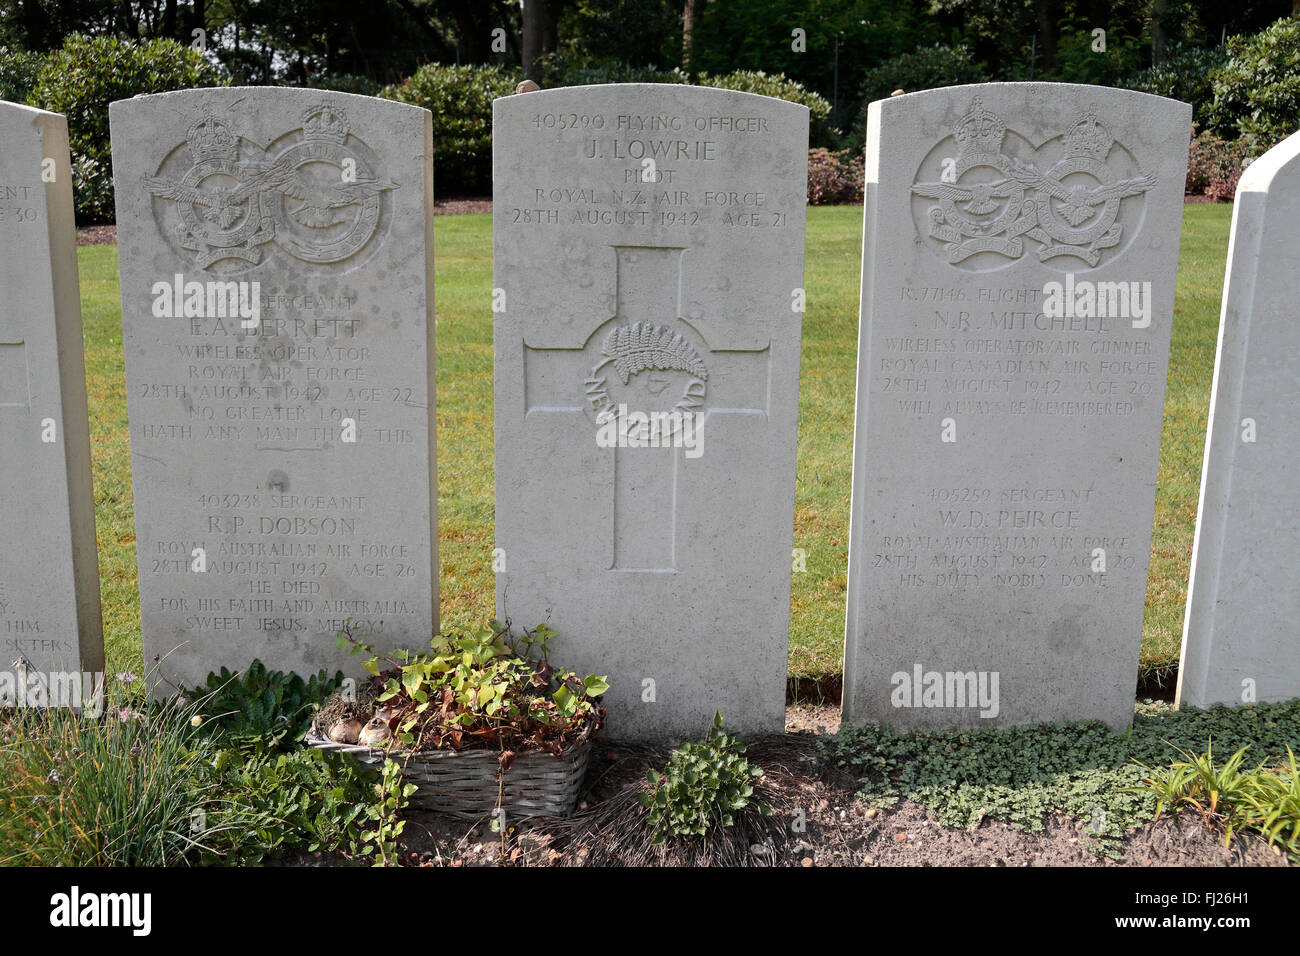 Headstones of maybe one plane crew from four nations in the CWGC Mook War Cemetery, Mook, Limburg, Netherlands. Stock Photo